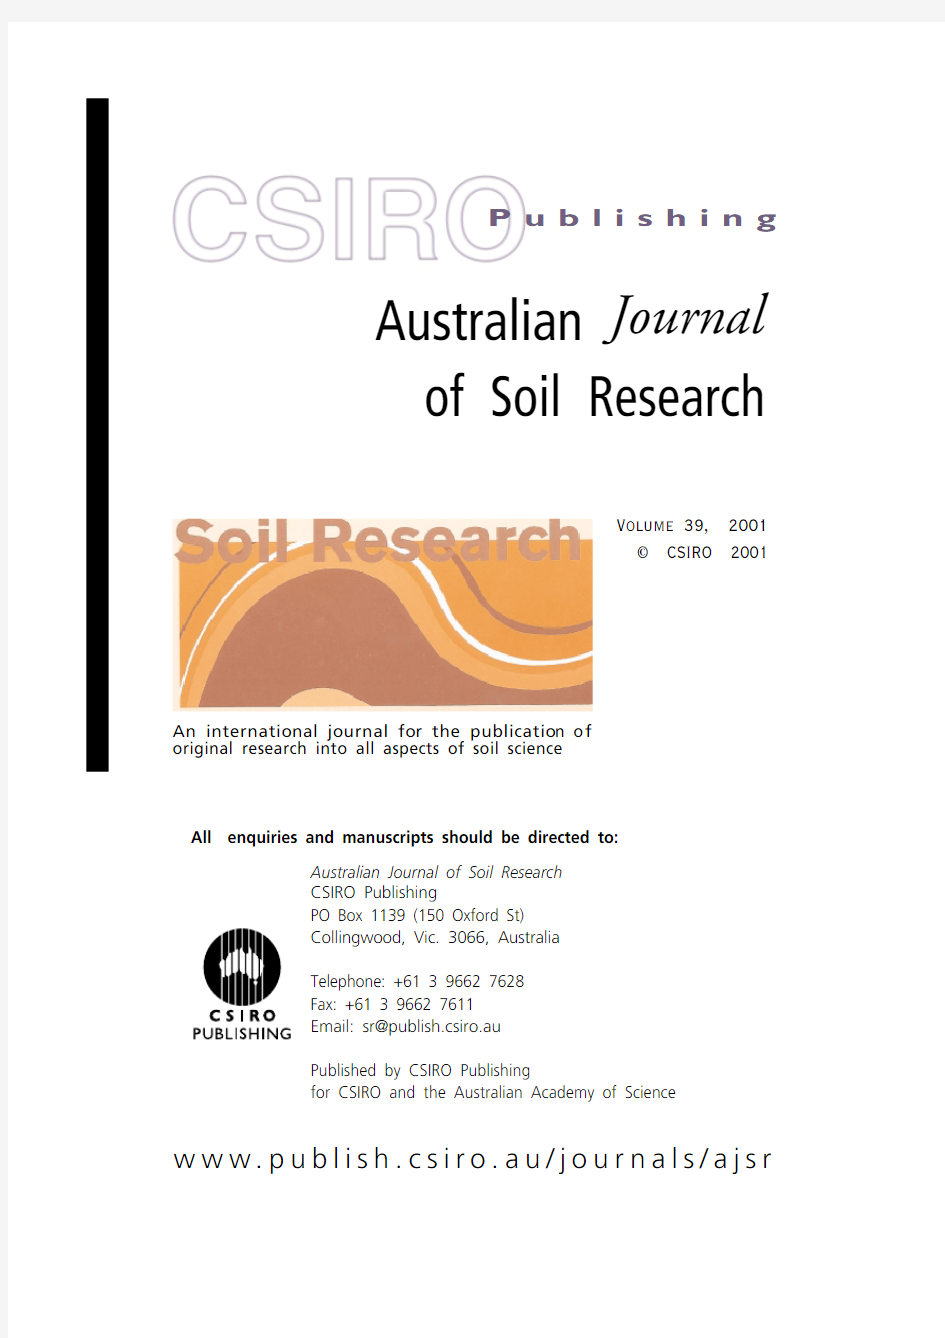 2001-Traffic and residue cover effects on infiltration